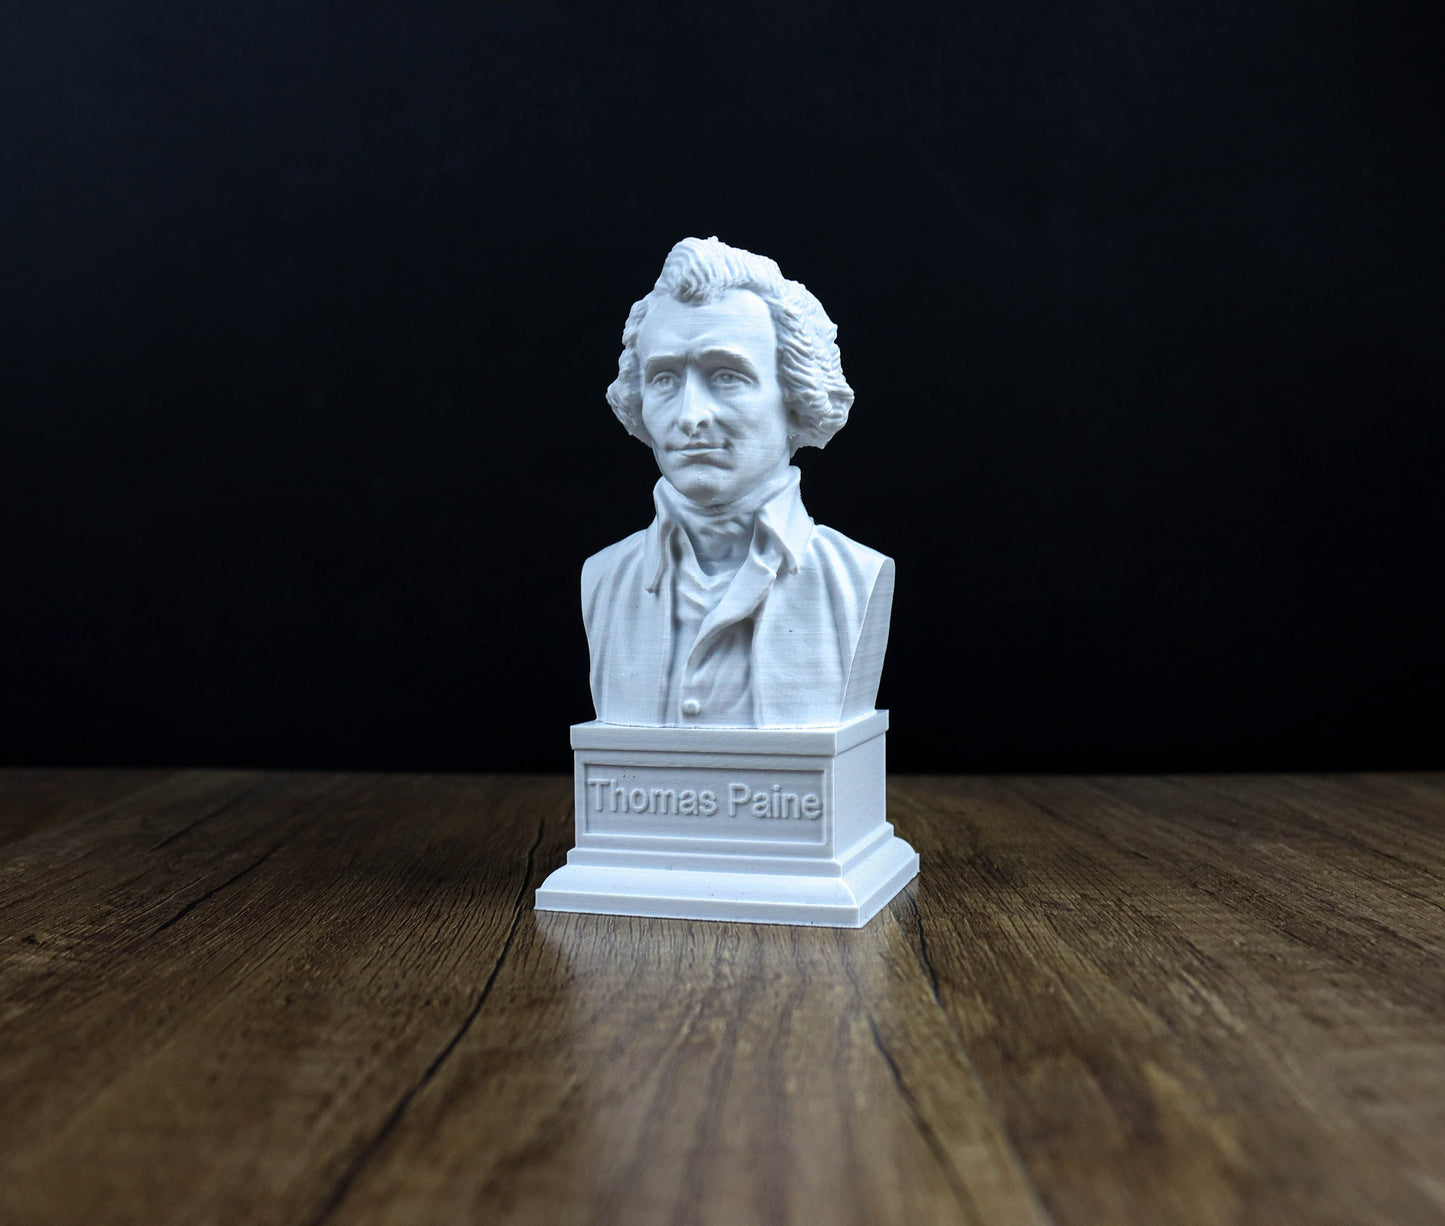 Thomas Paine Bust, American Founding Father, Political Activist, Philosopher